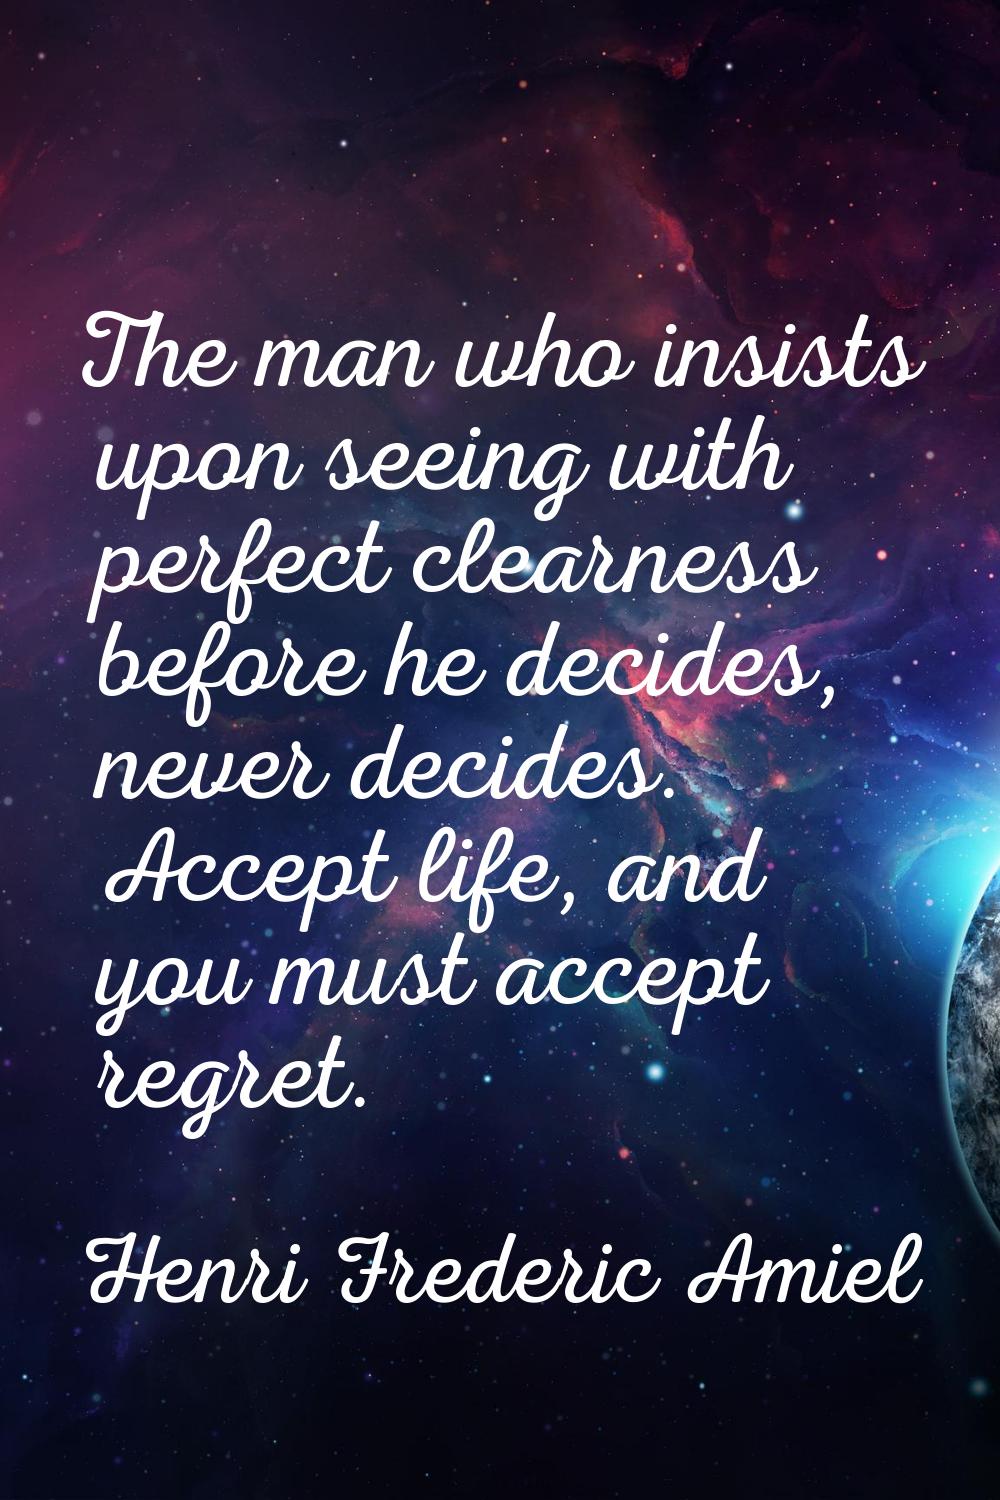 The man who insists upon seeing with perfect clearness before he decides, never decides. Accept lif